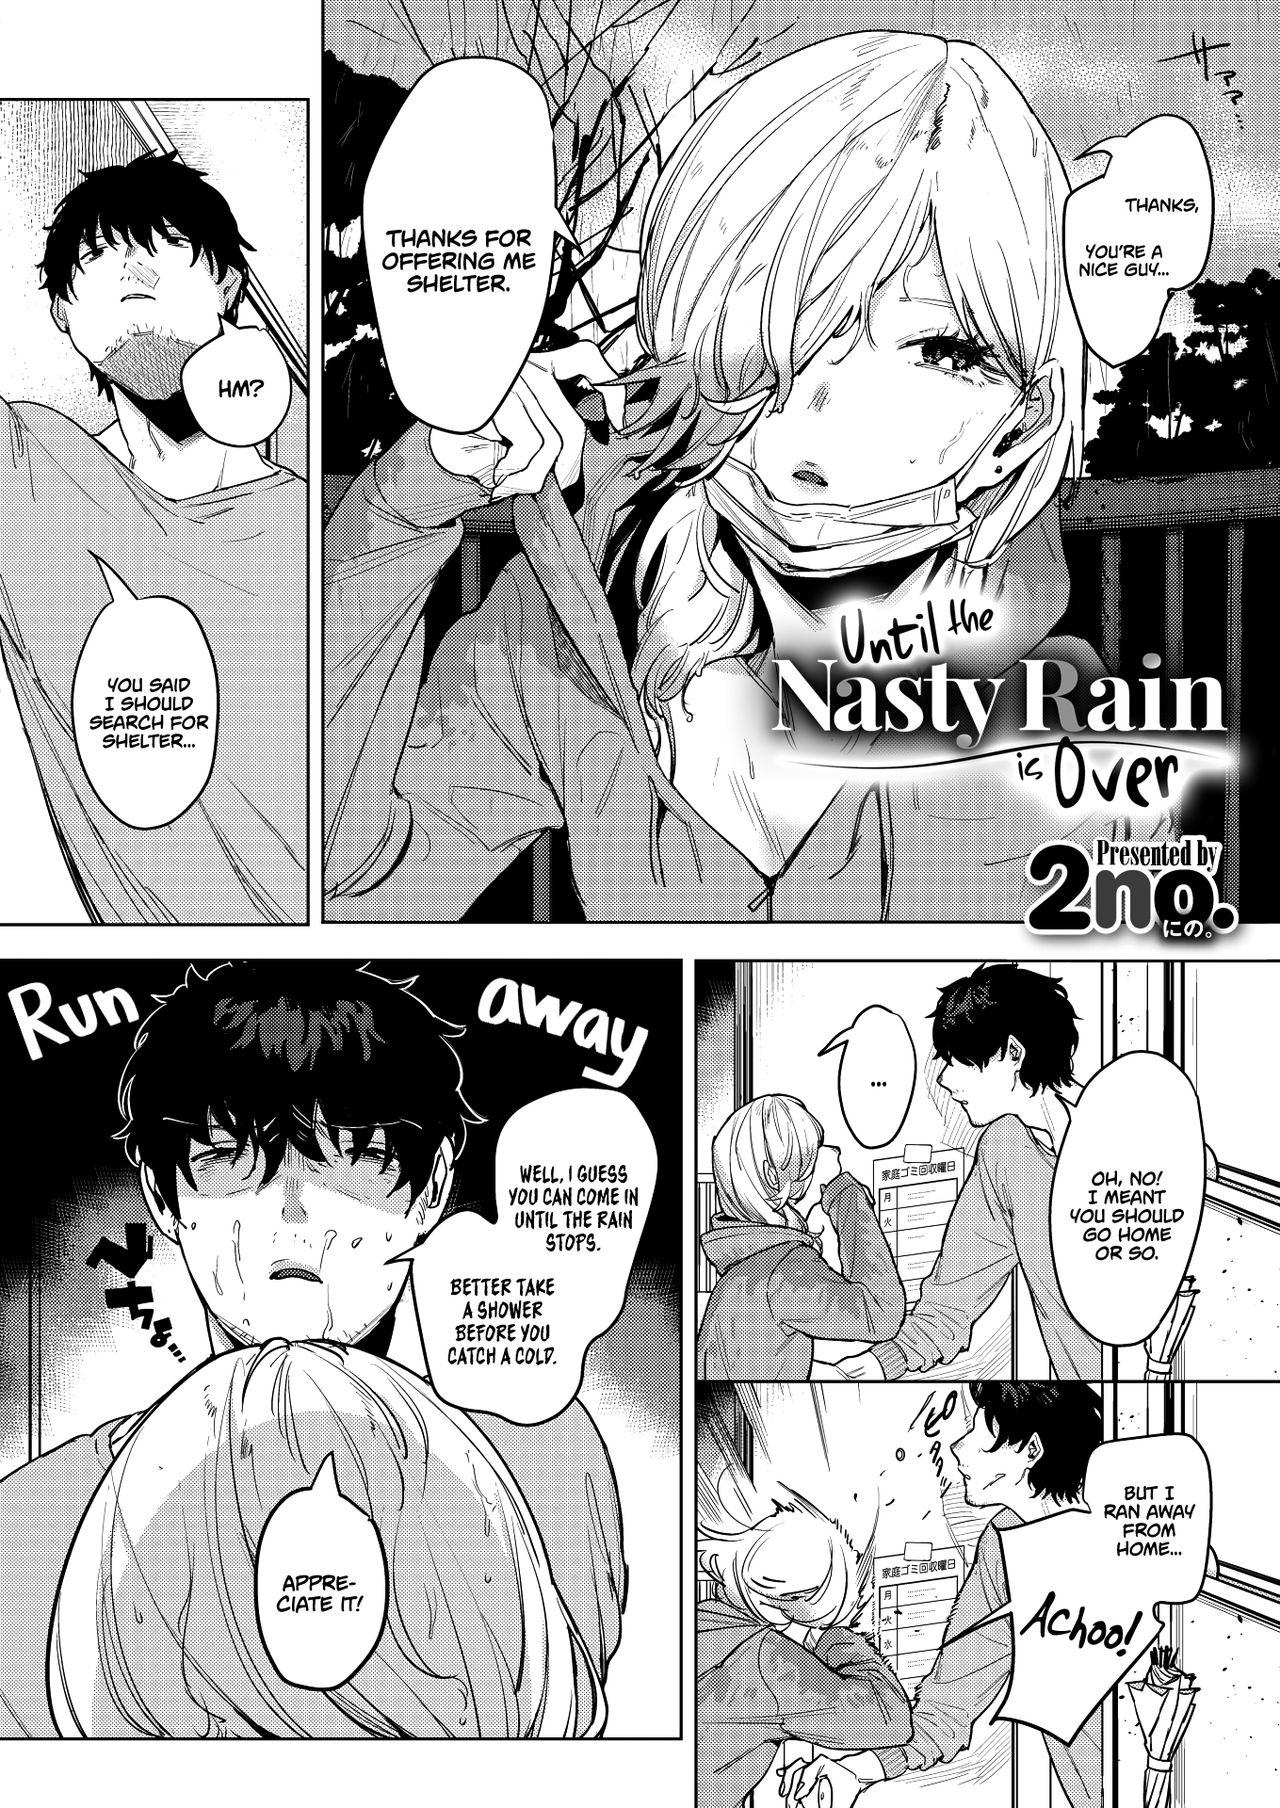 Couple Until the Nasty Rain is Over Vip - Page 2